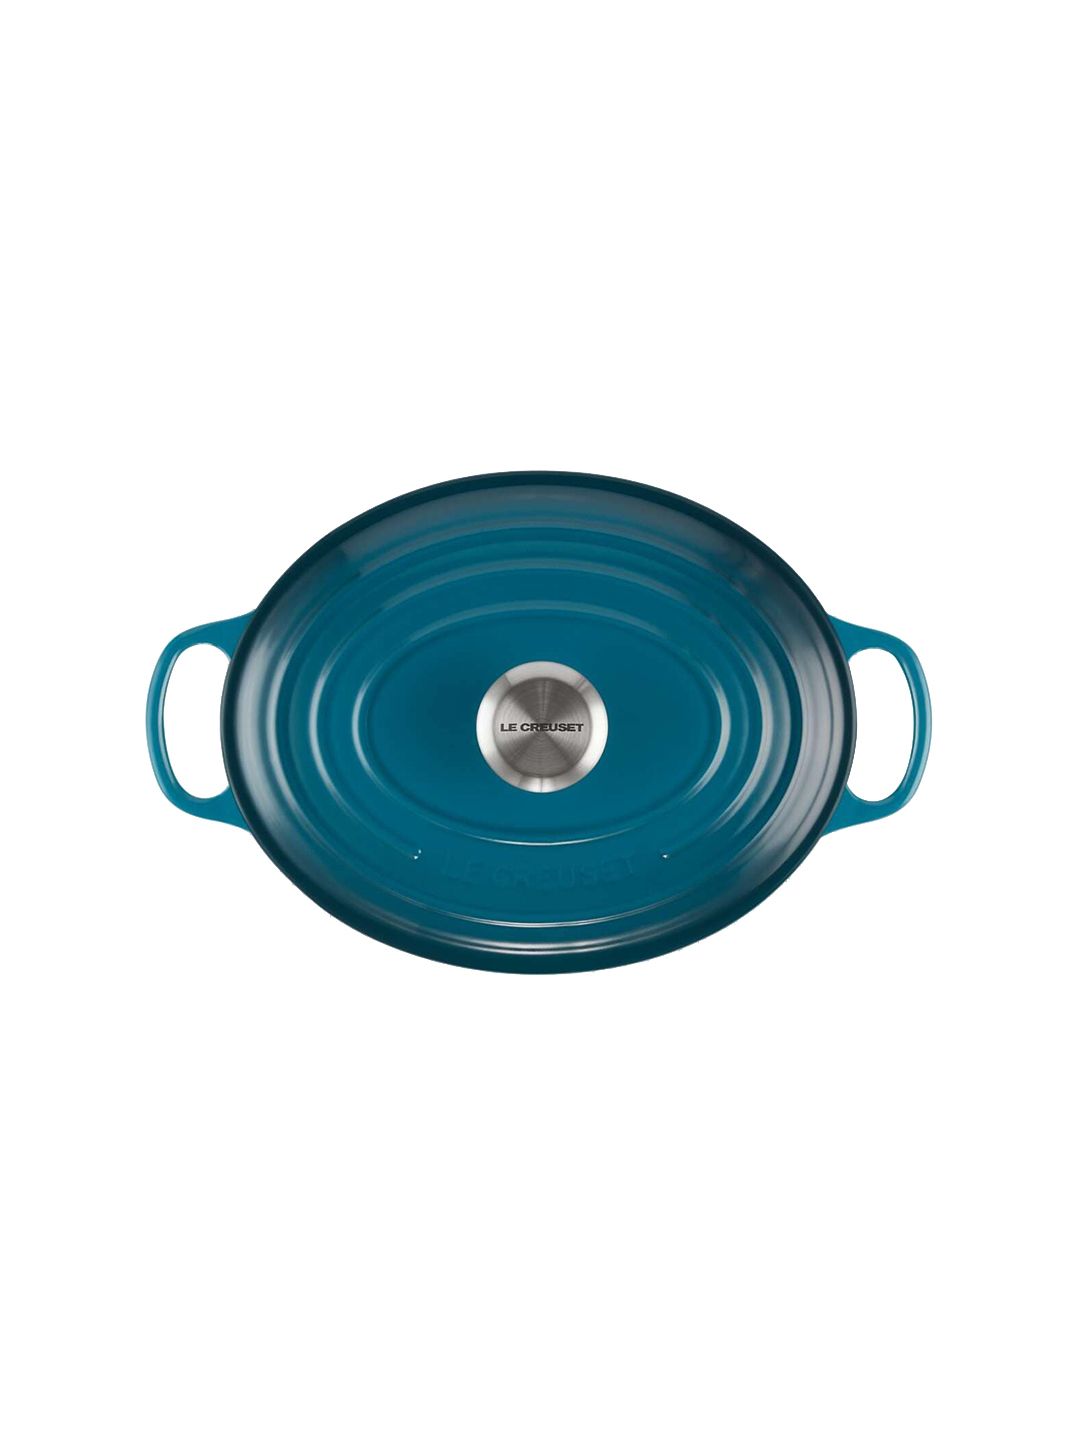 LE CREUSET Teal Oval Casserole Price in India